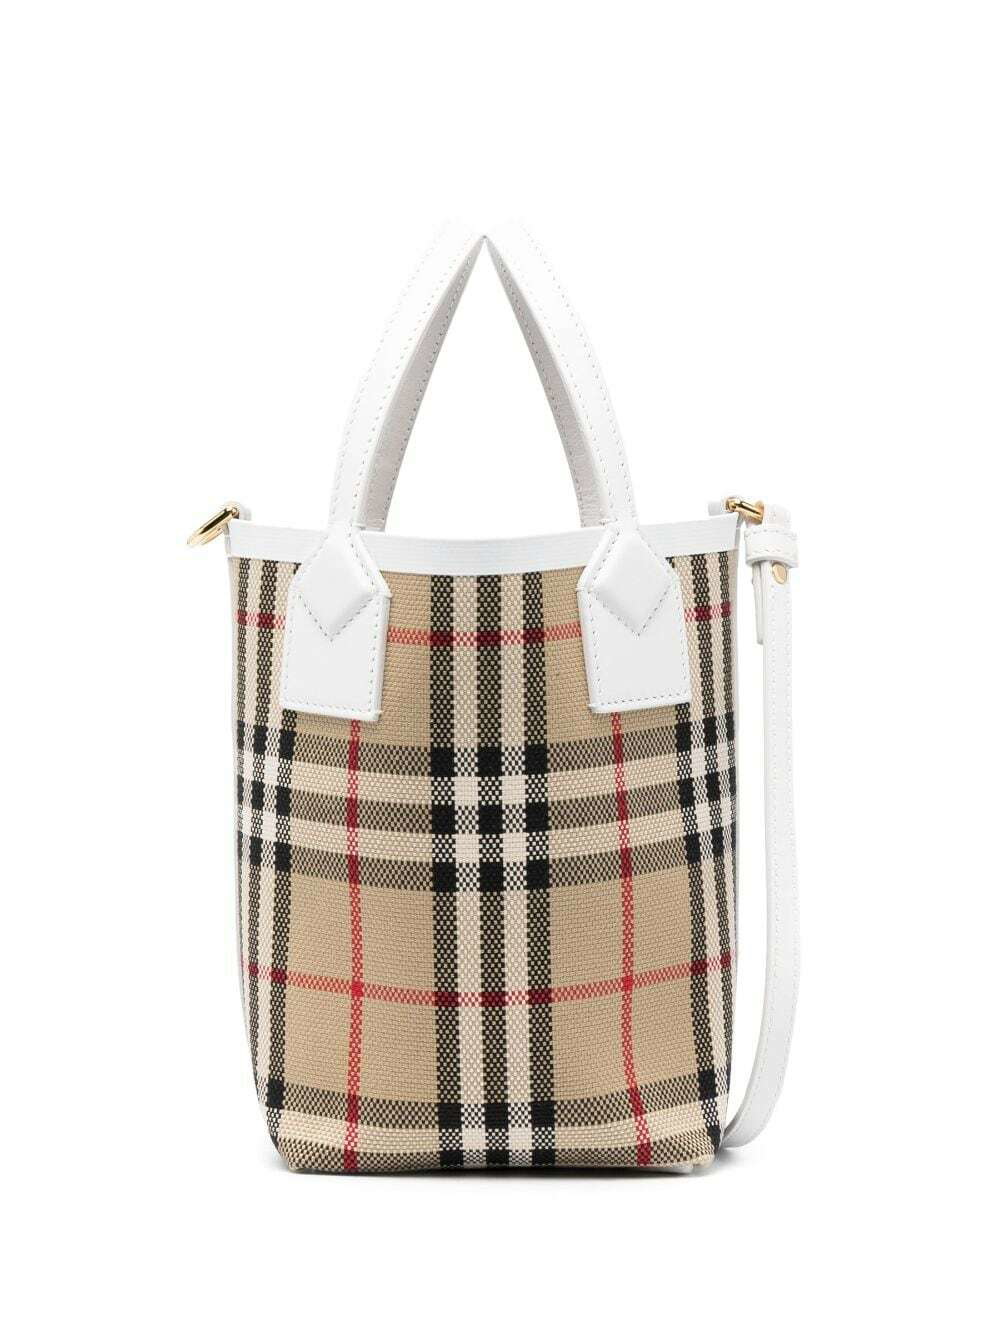 Burberry Small Checkered Birch Brown Bucket Bag New FW23